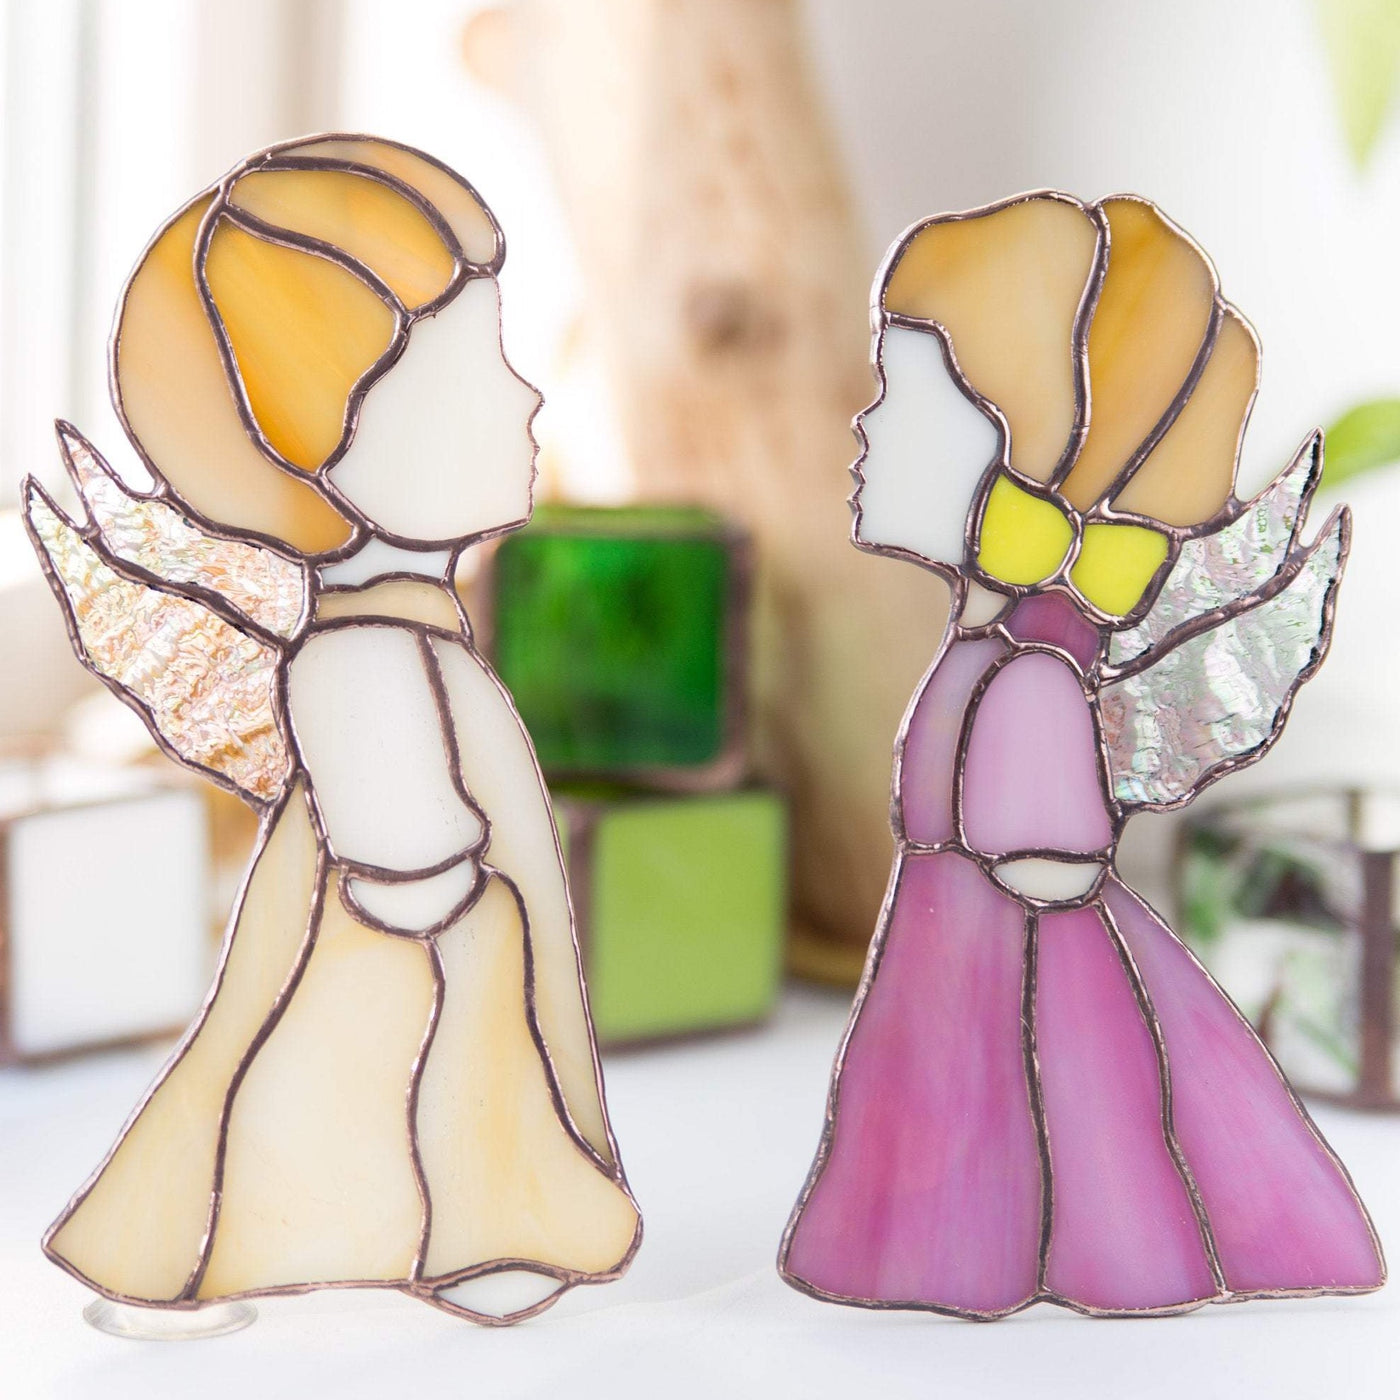 Stained glass angel beige boy angel and  pink girl angel suncatchers